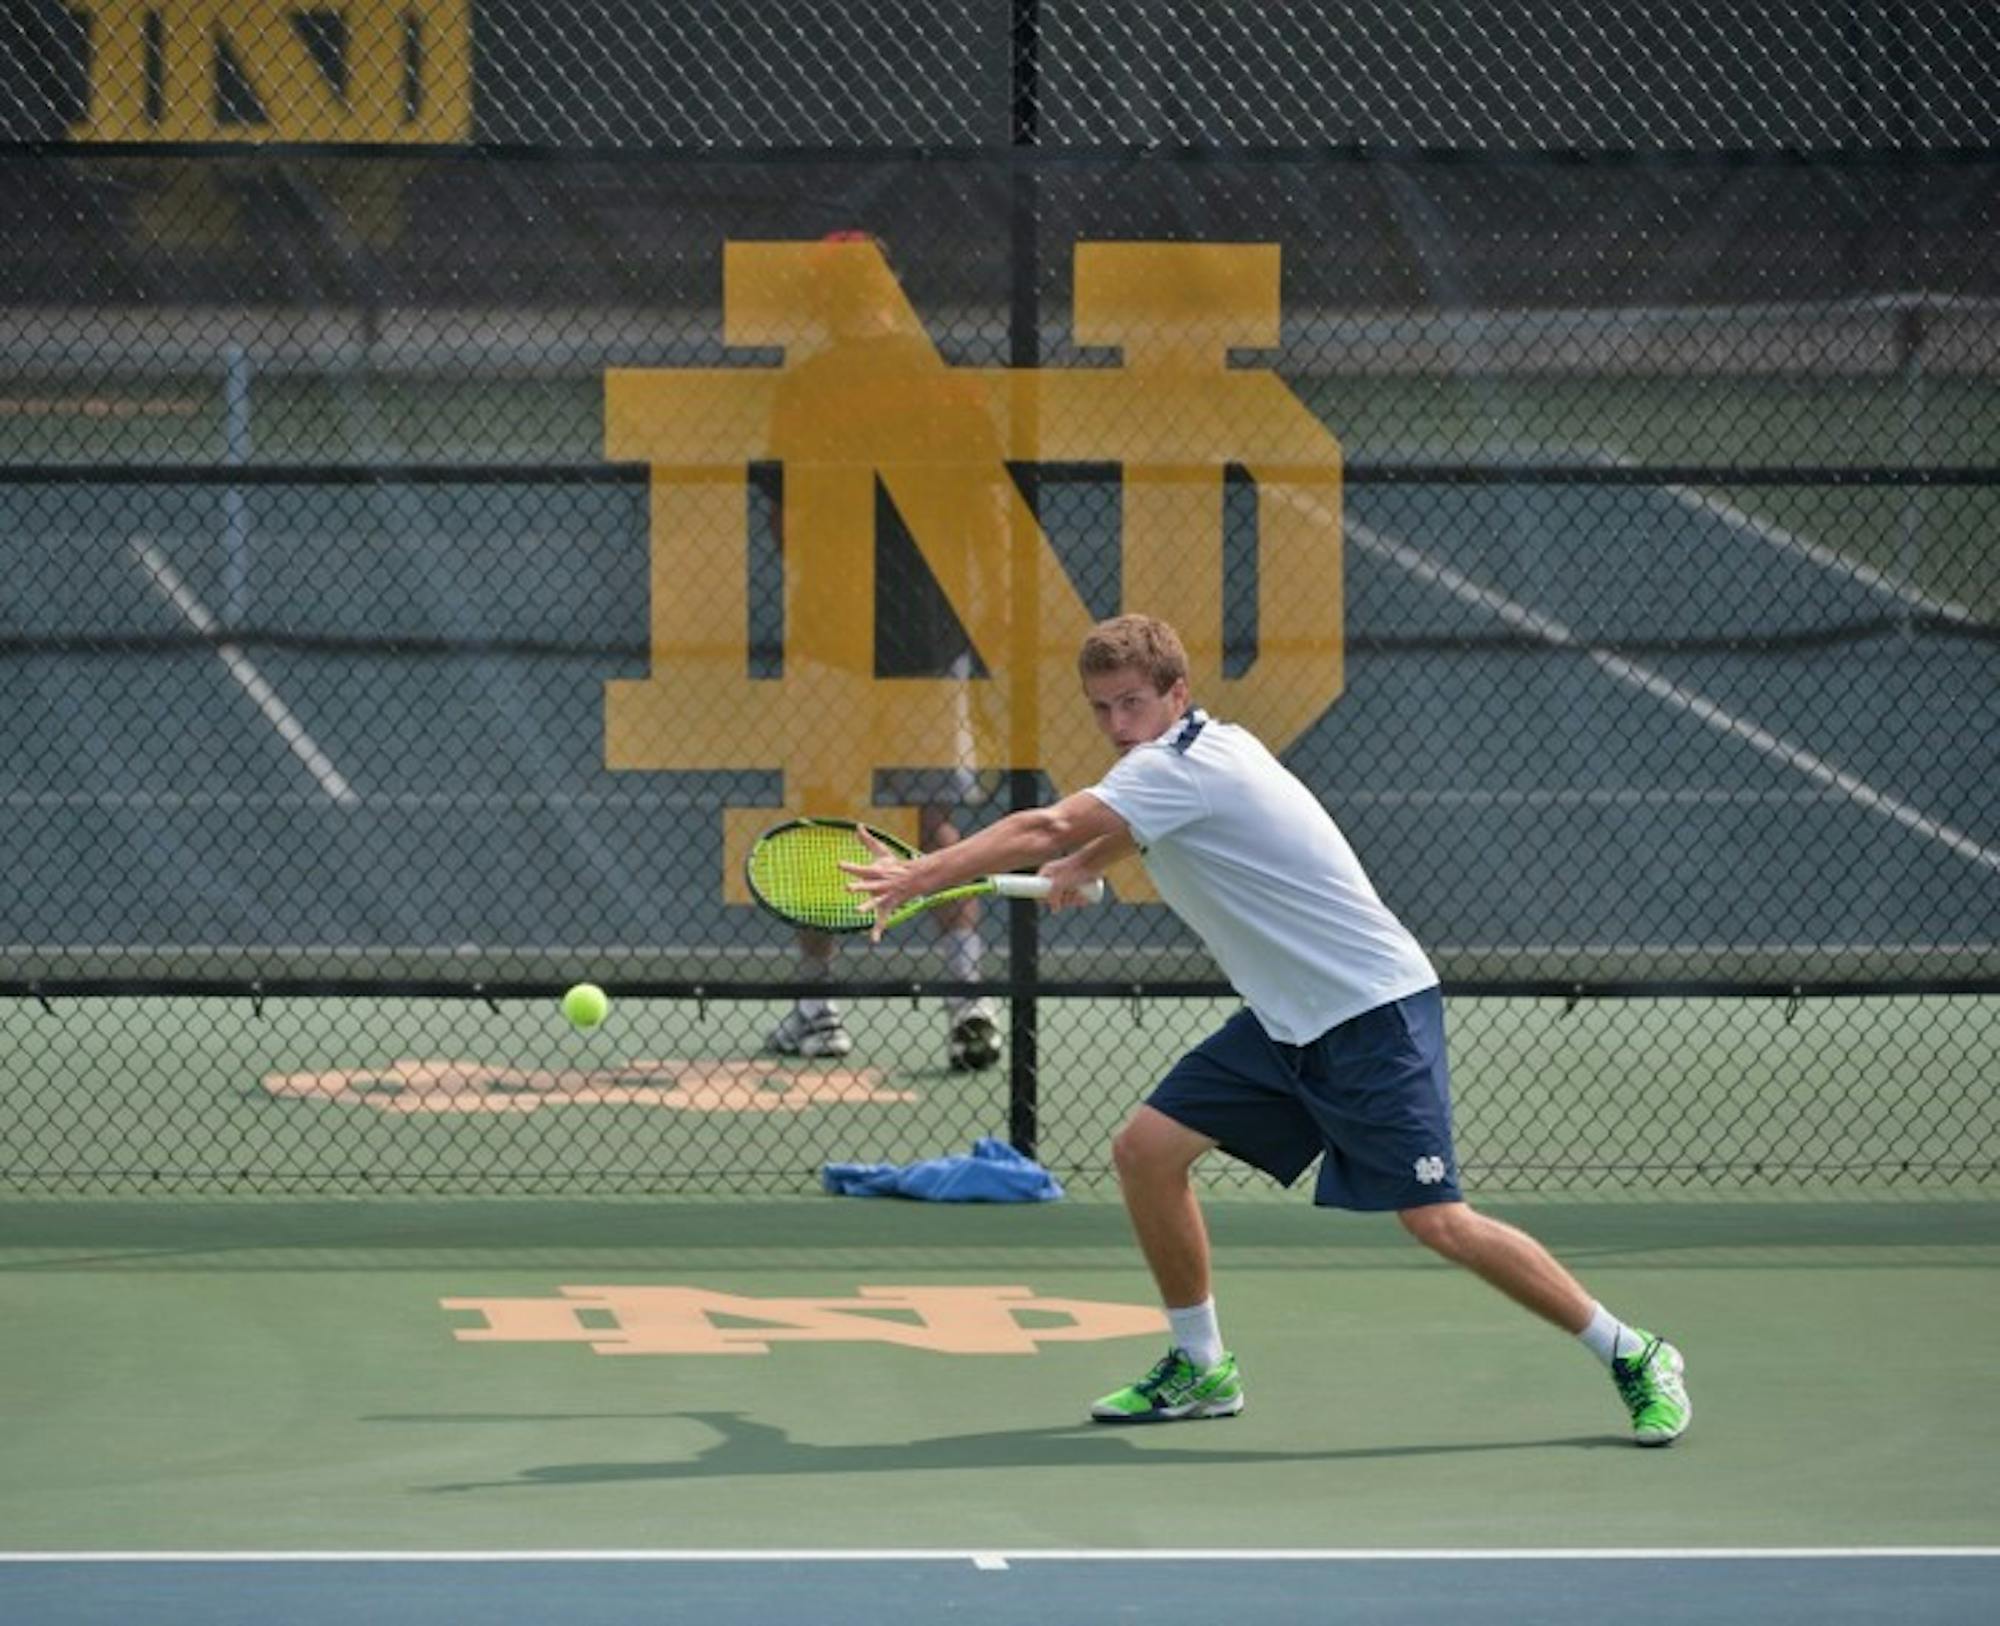 Senior Quentin Monaghan winds up for a hit during a 4-3 victory over North Carolina State on April 18 at Eck Tennis Pavilion.